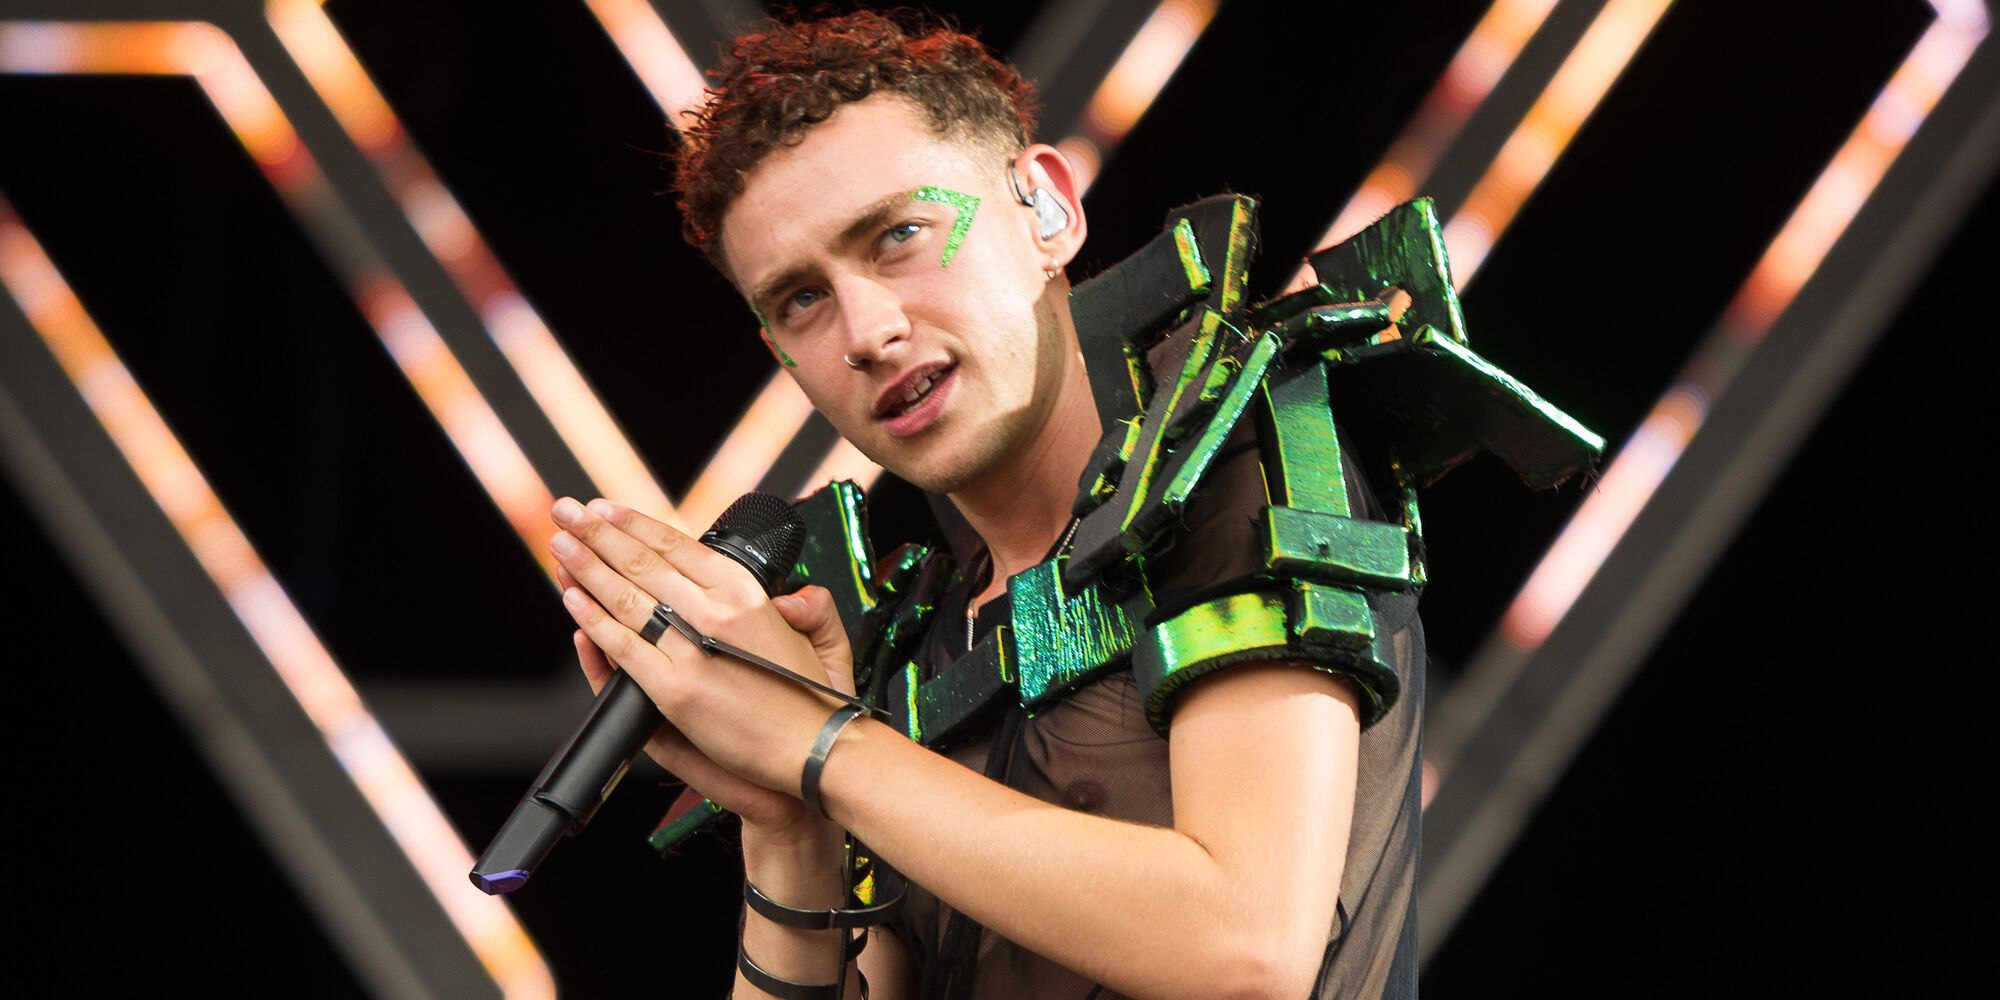 Discover The Talented Musician: Who Is Olly Alexander?